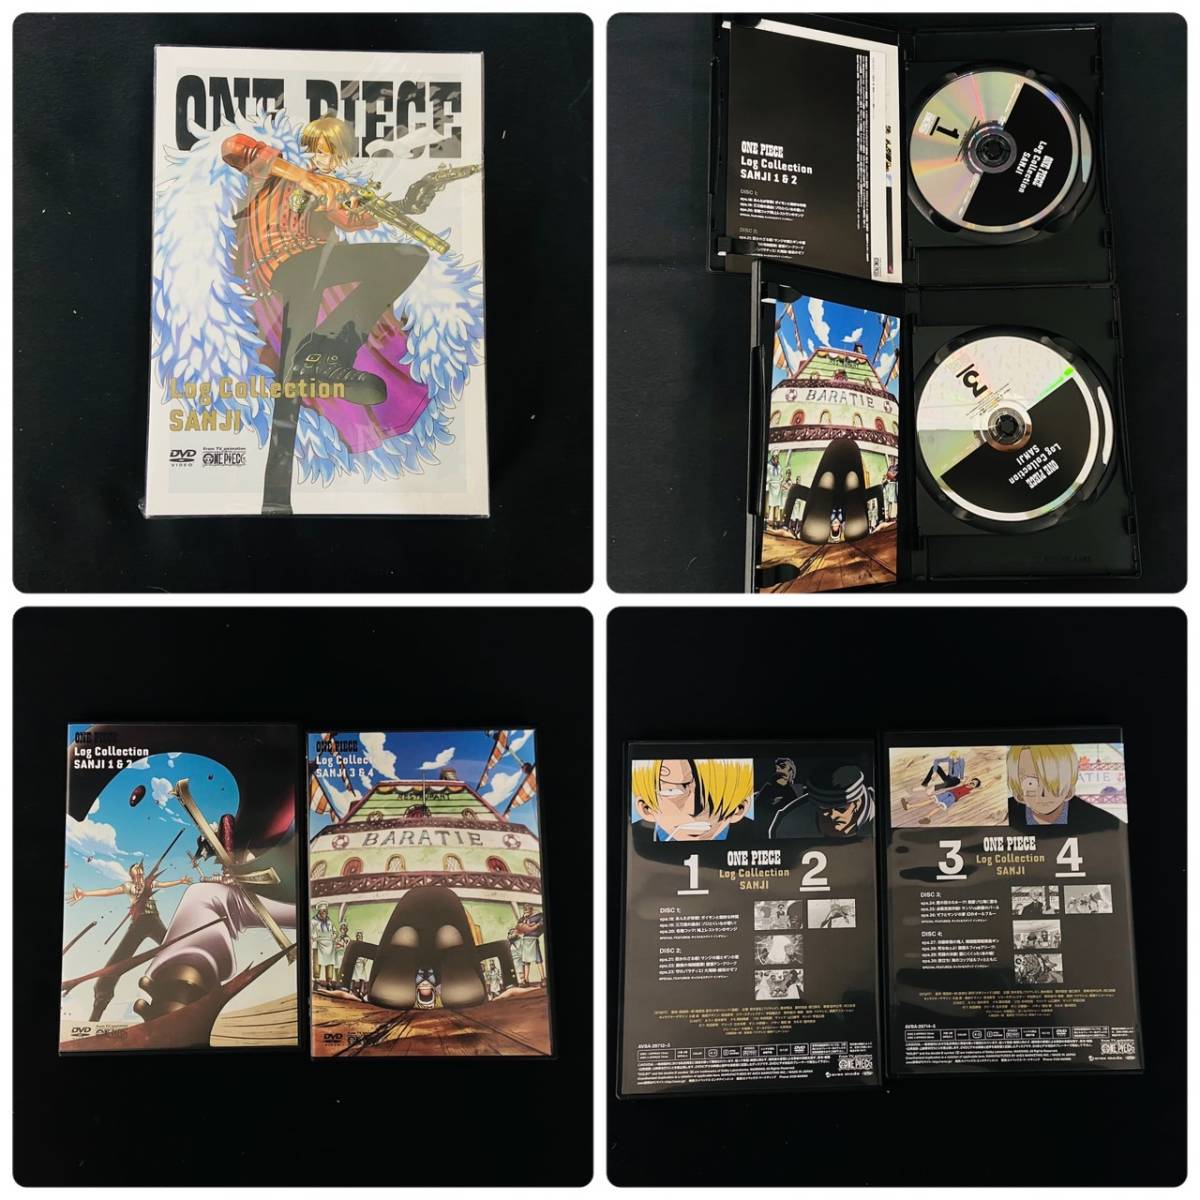 【USED】ONE PIECE Log Collection ワンピース ログコレクション DVD 4巻セット EAST BLUE / SANJI / NAMI / LOGUE TOWN 集英社 尾田栄一郎_画像6